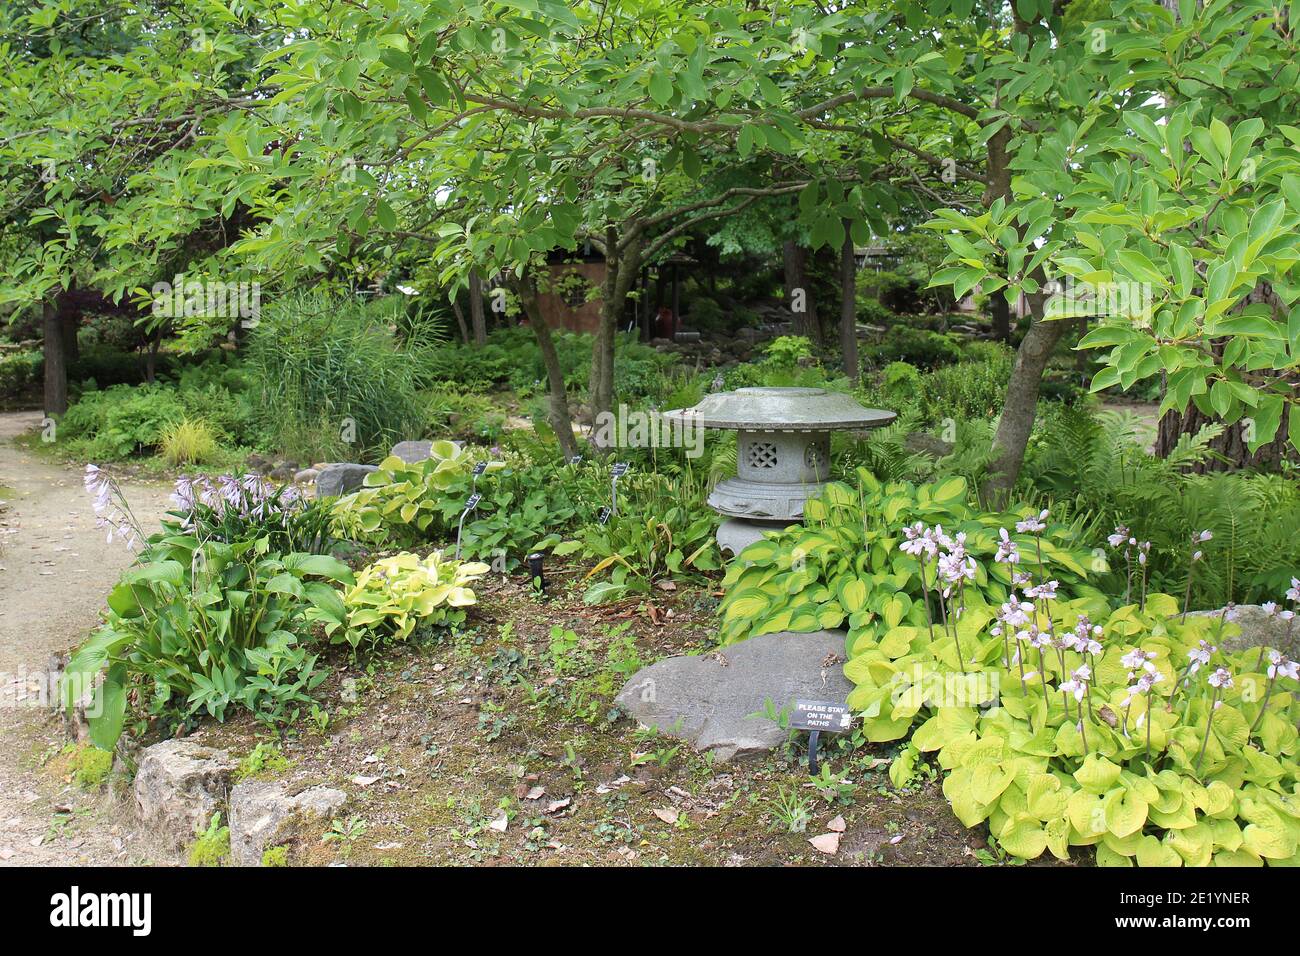 A Japanese Garden with a variety of hosta plants and flowers, trees, ferns, shrubs and walking paths at Rotary Botanic Gardens in Janesville, Wisconsi Stock Photo